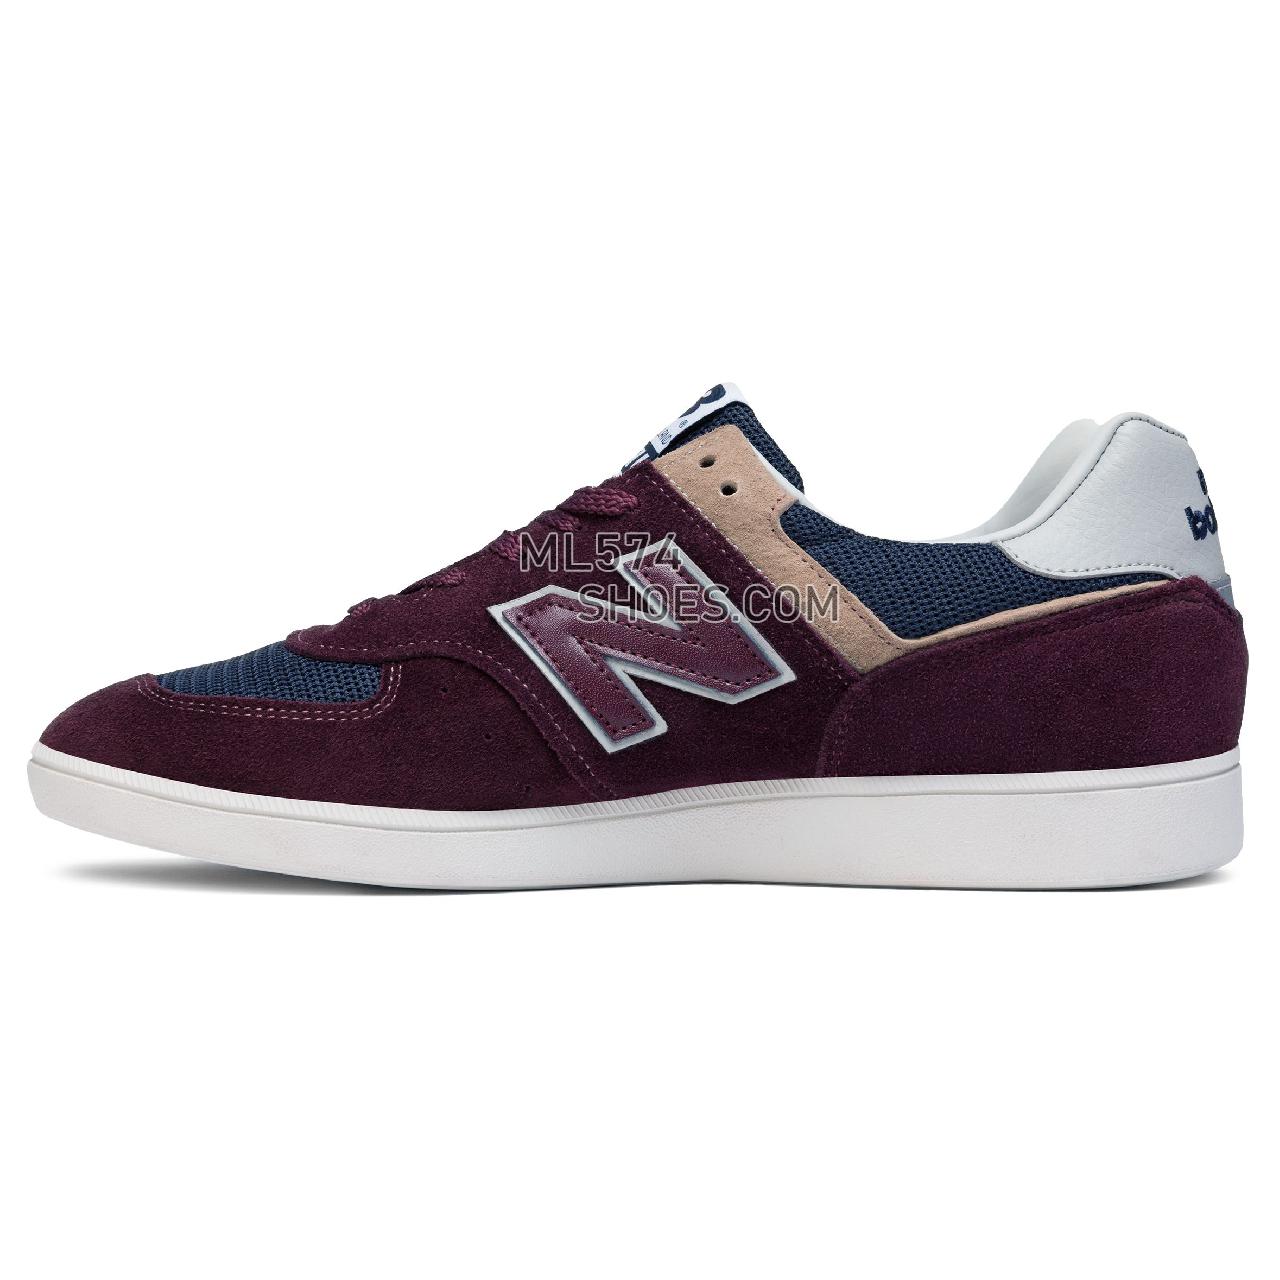 New Balance CT576 - Men's CT576 Sport Classic - Port Royale with Outerspace - CT576OBN